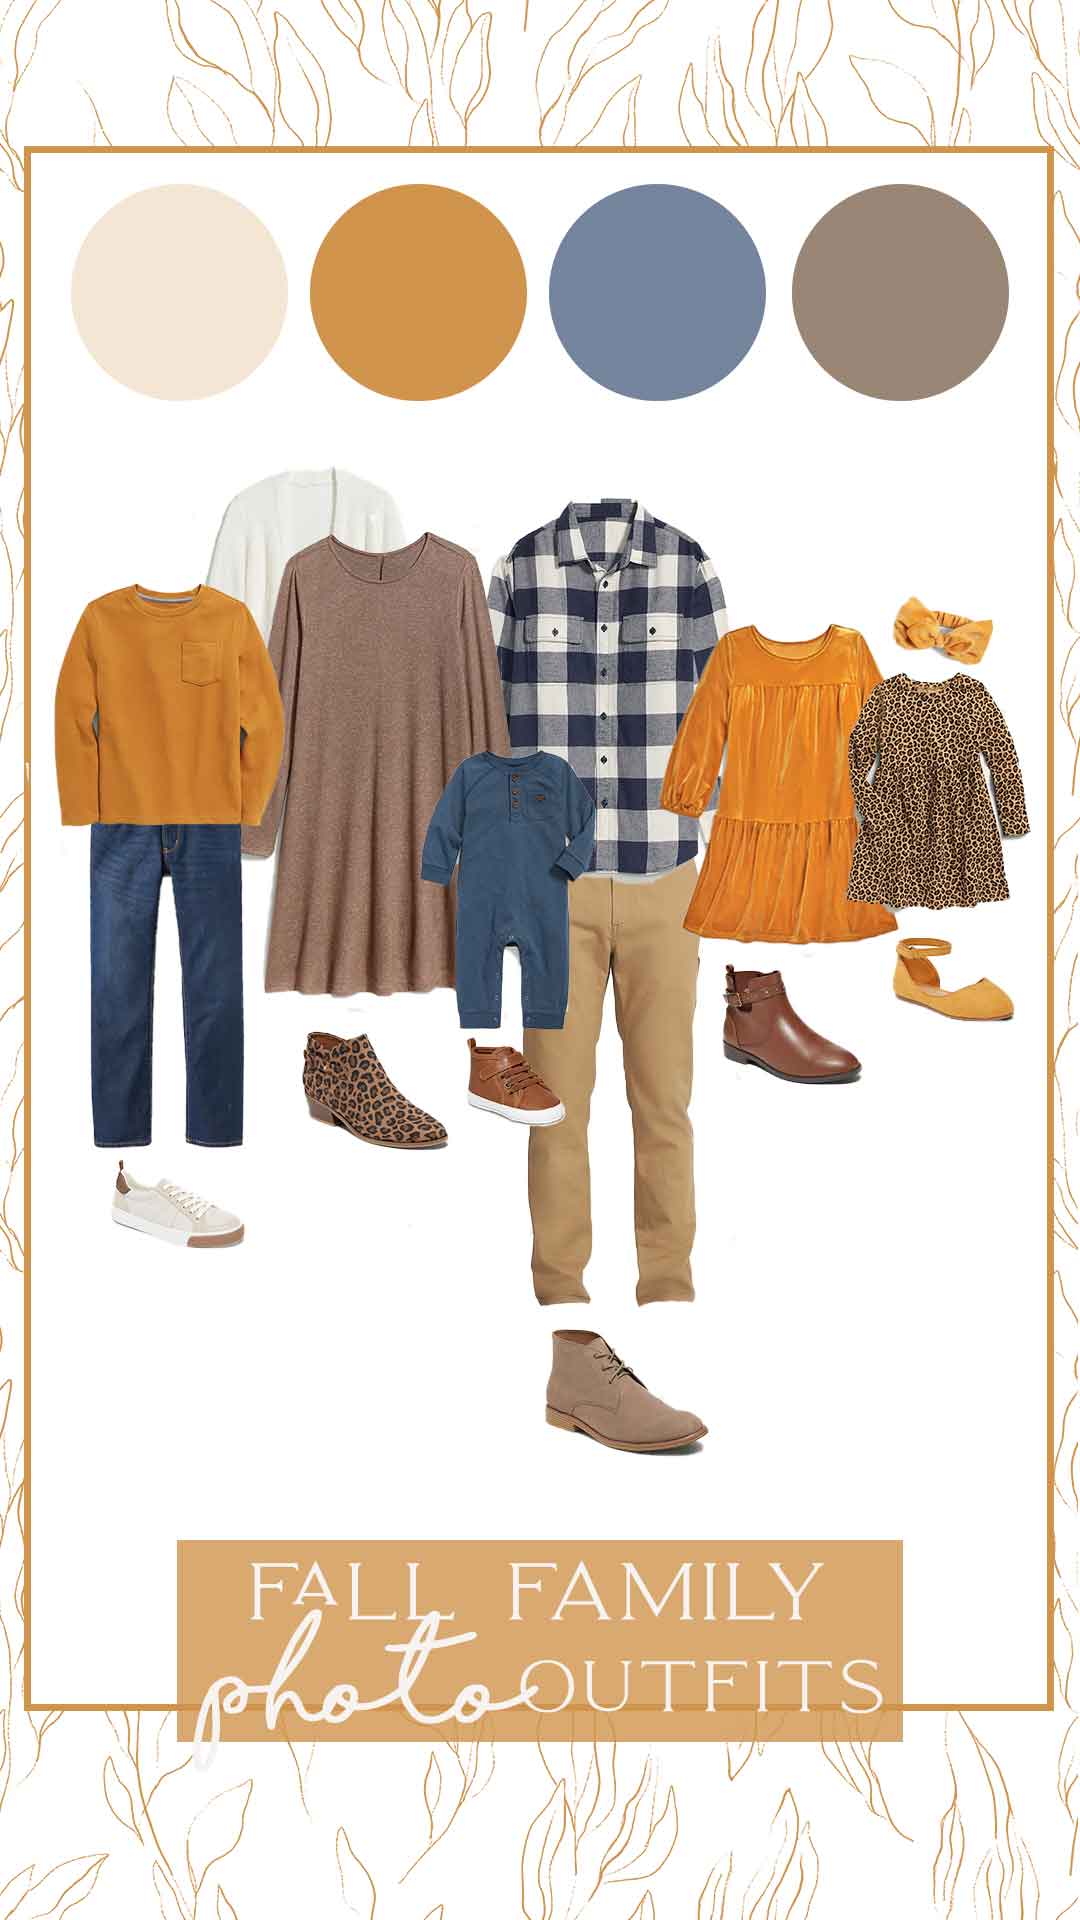 fall family pictures outfits